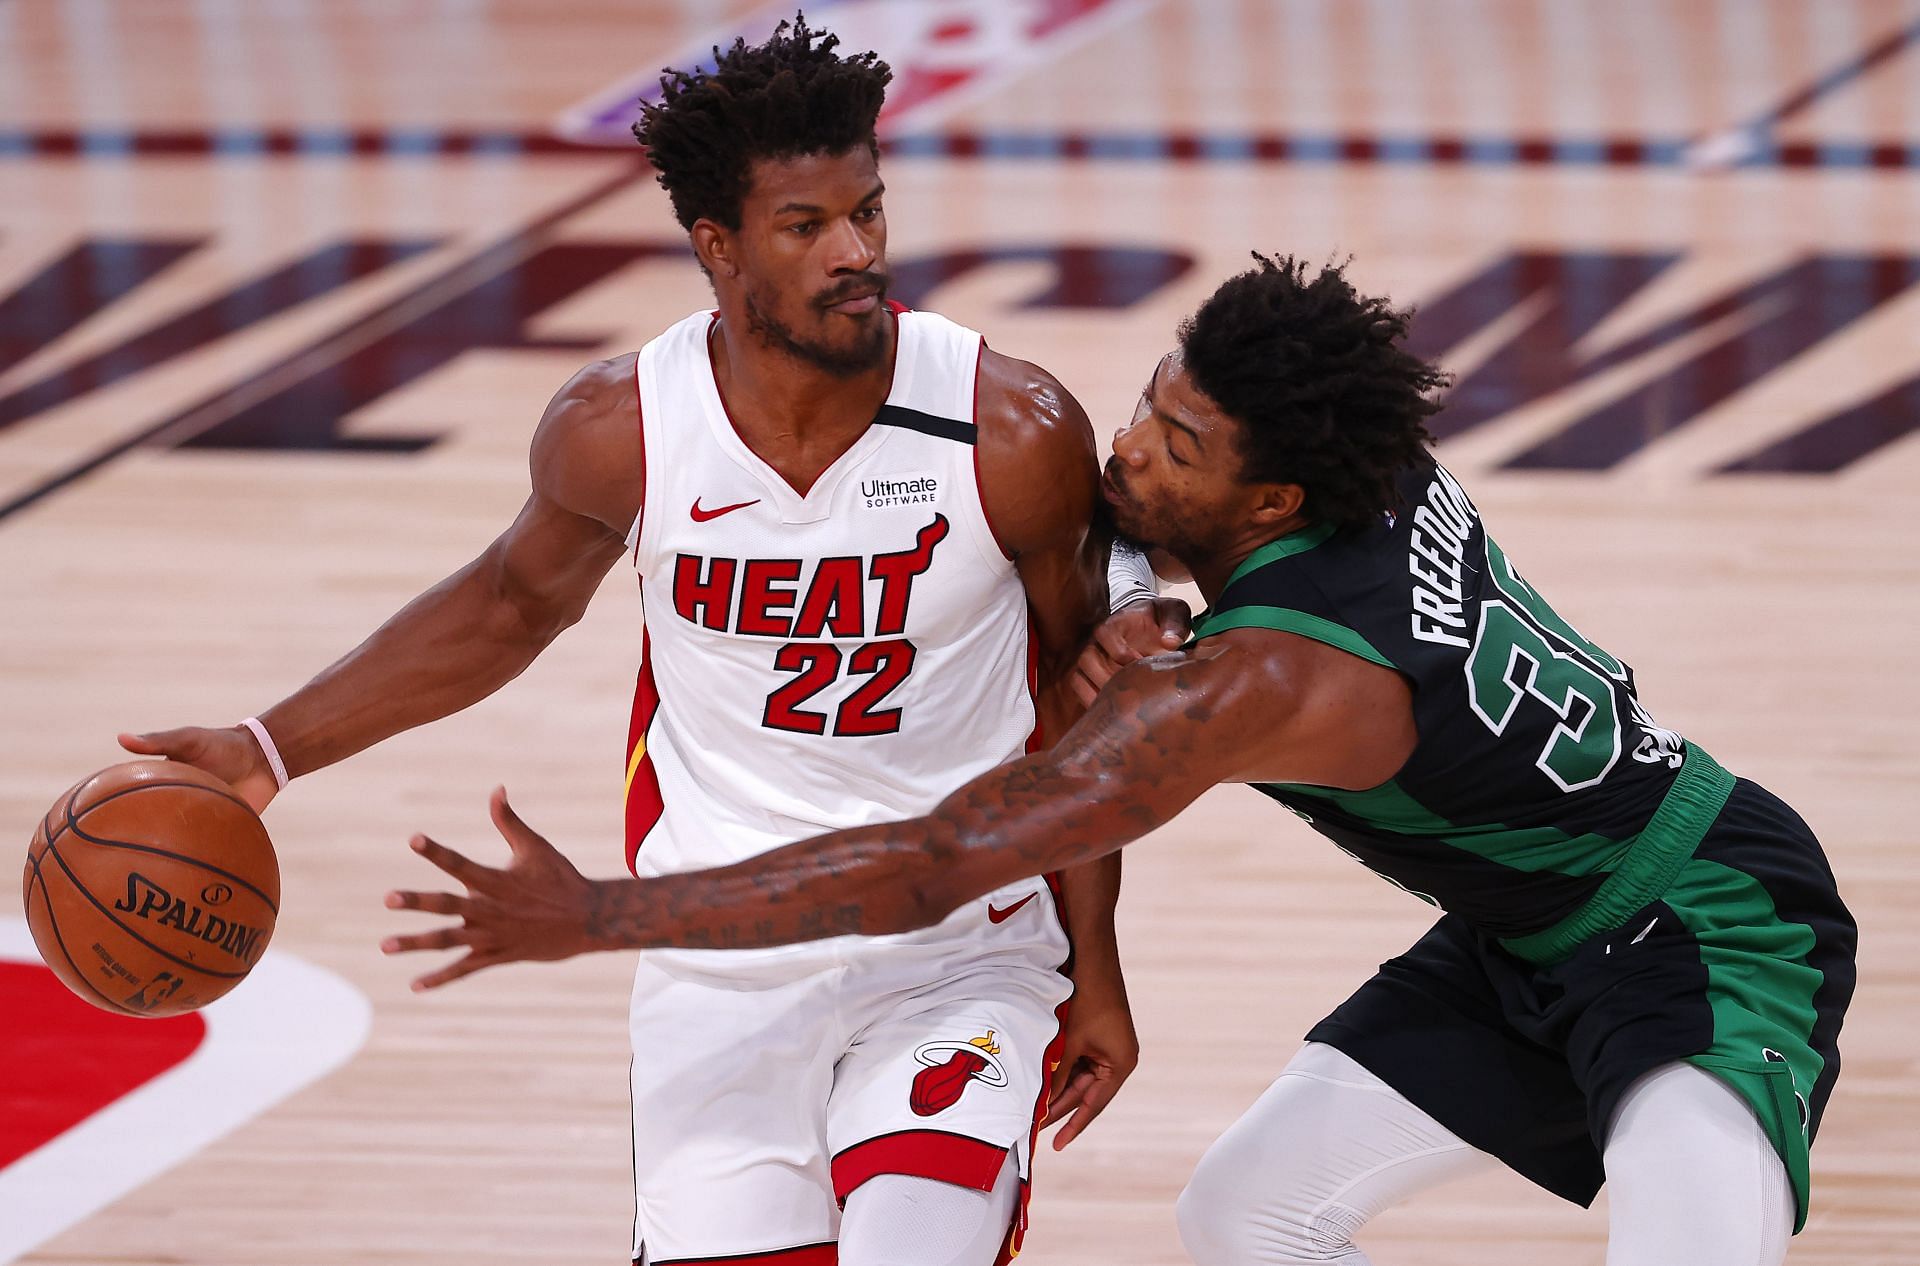 The Miami Heat will meet the Boston Celtics in Game 1 of the Eastern Conference Finals